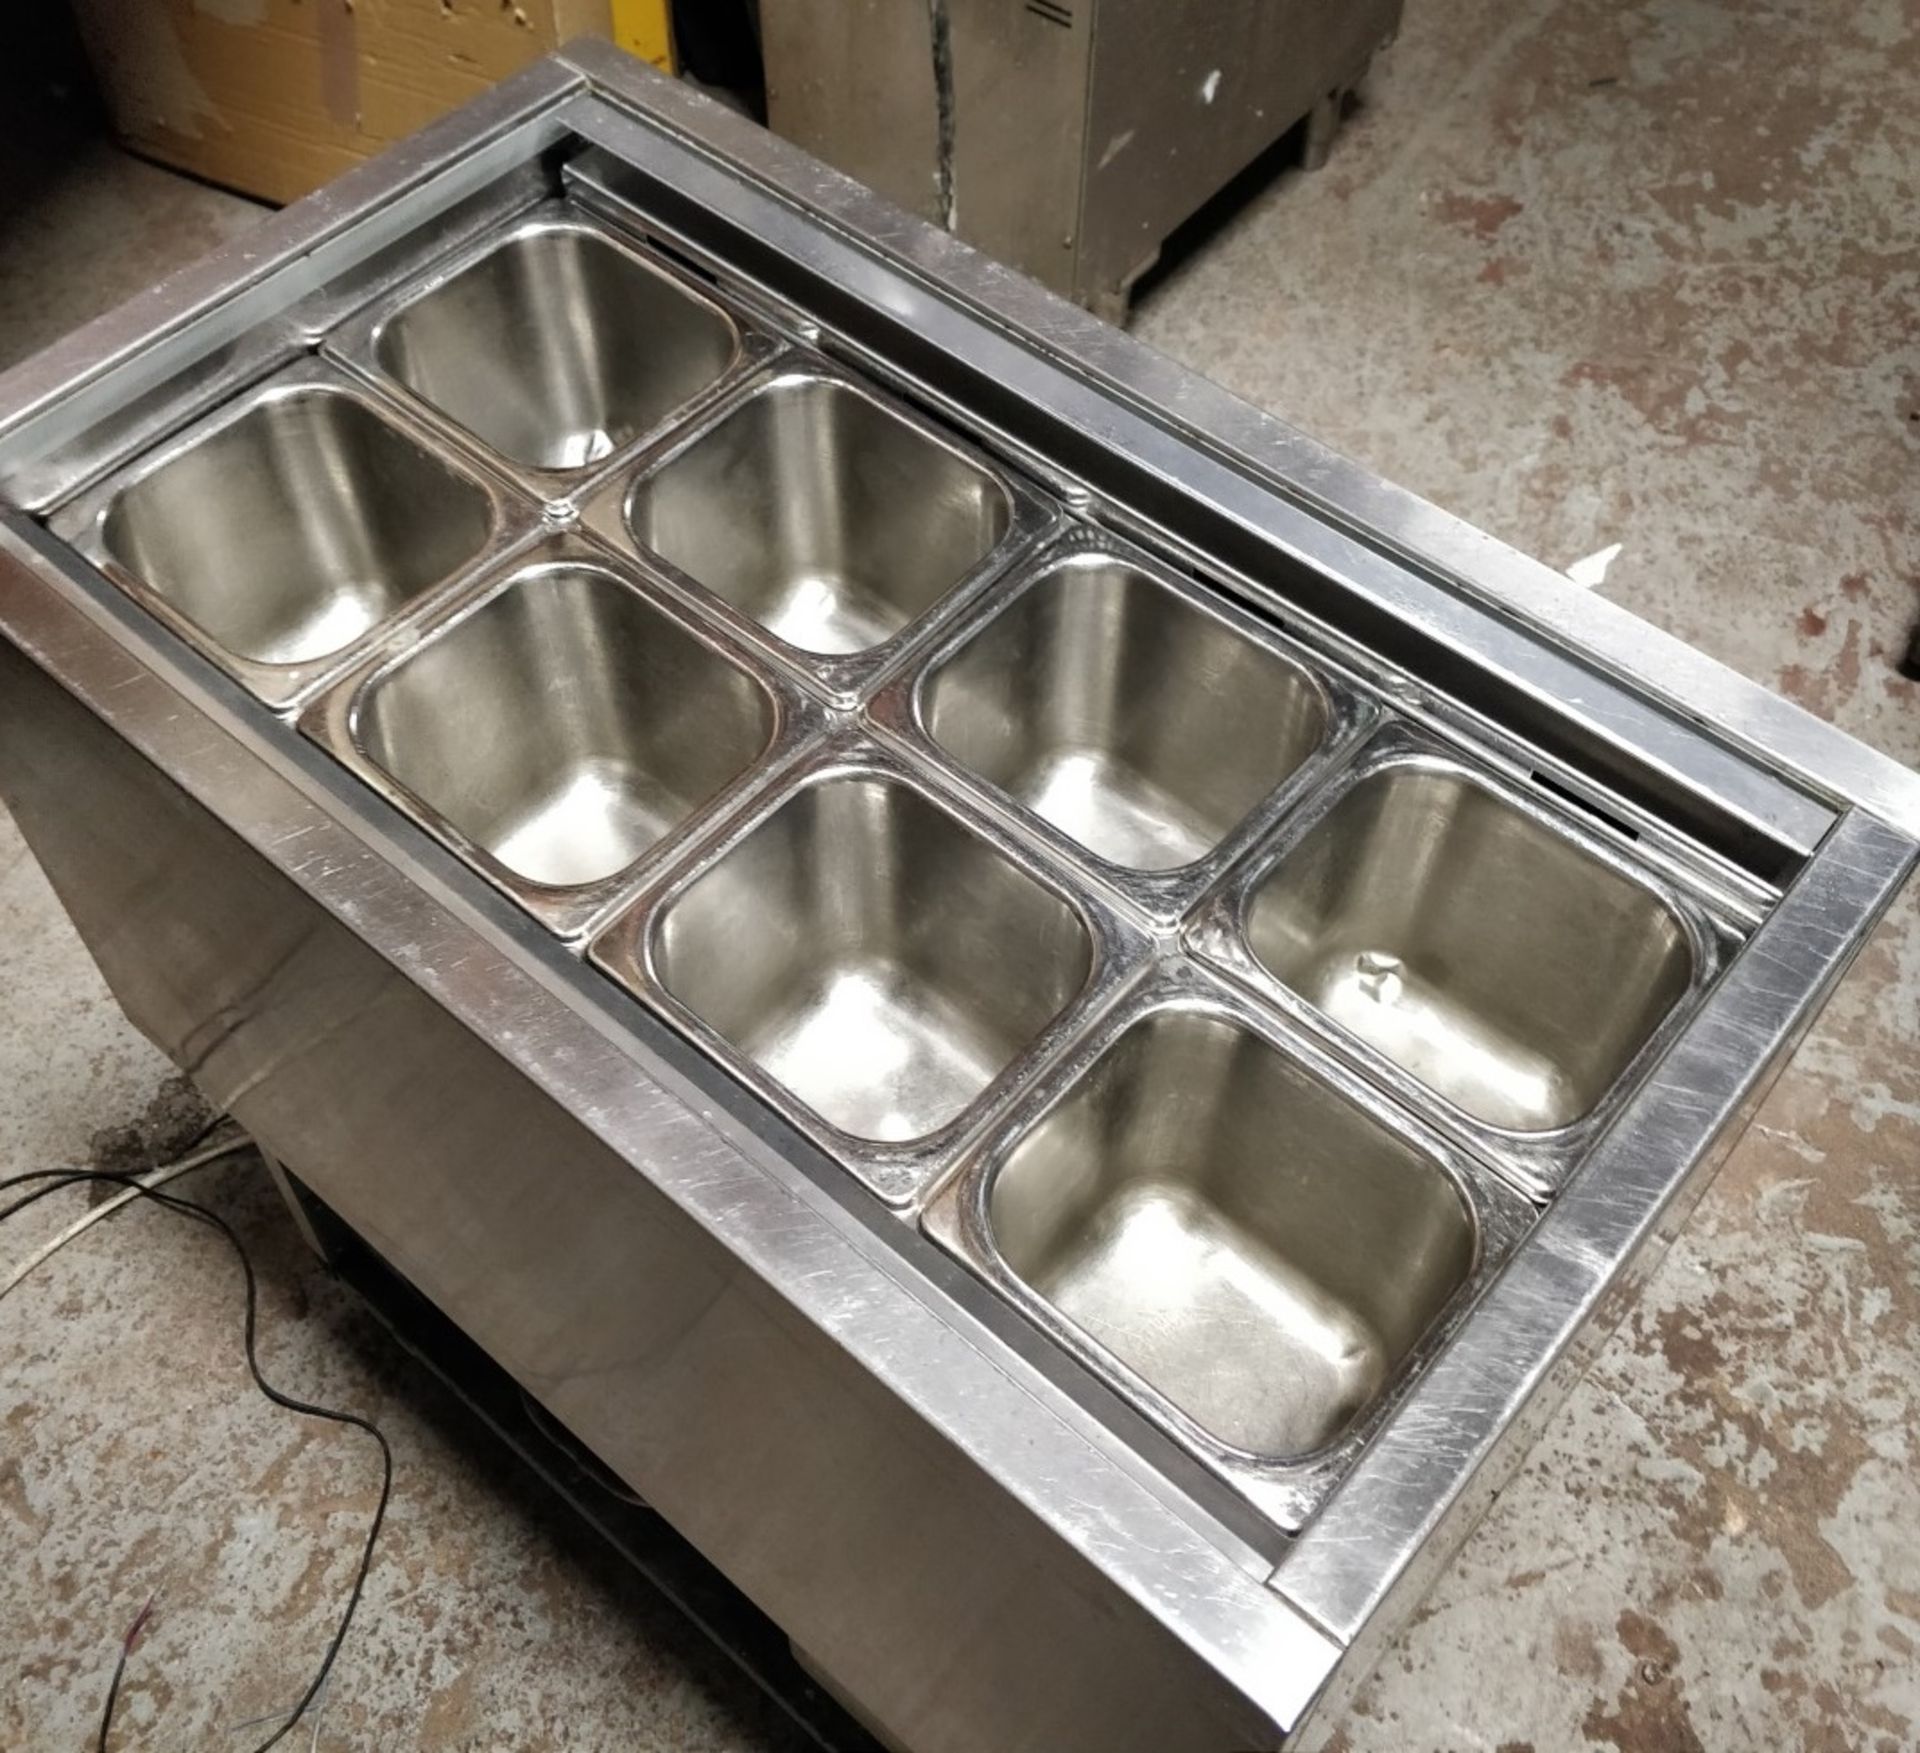 1 x Williams Refrigerated Counter Prep Well With Gastro Pans and Stainless Steel Finish - 240v UK - Image 2 of 6